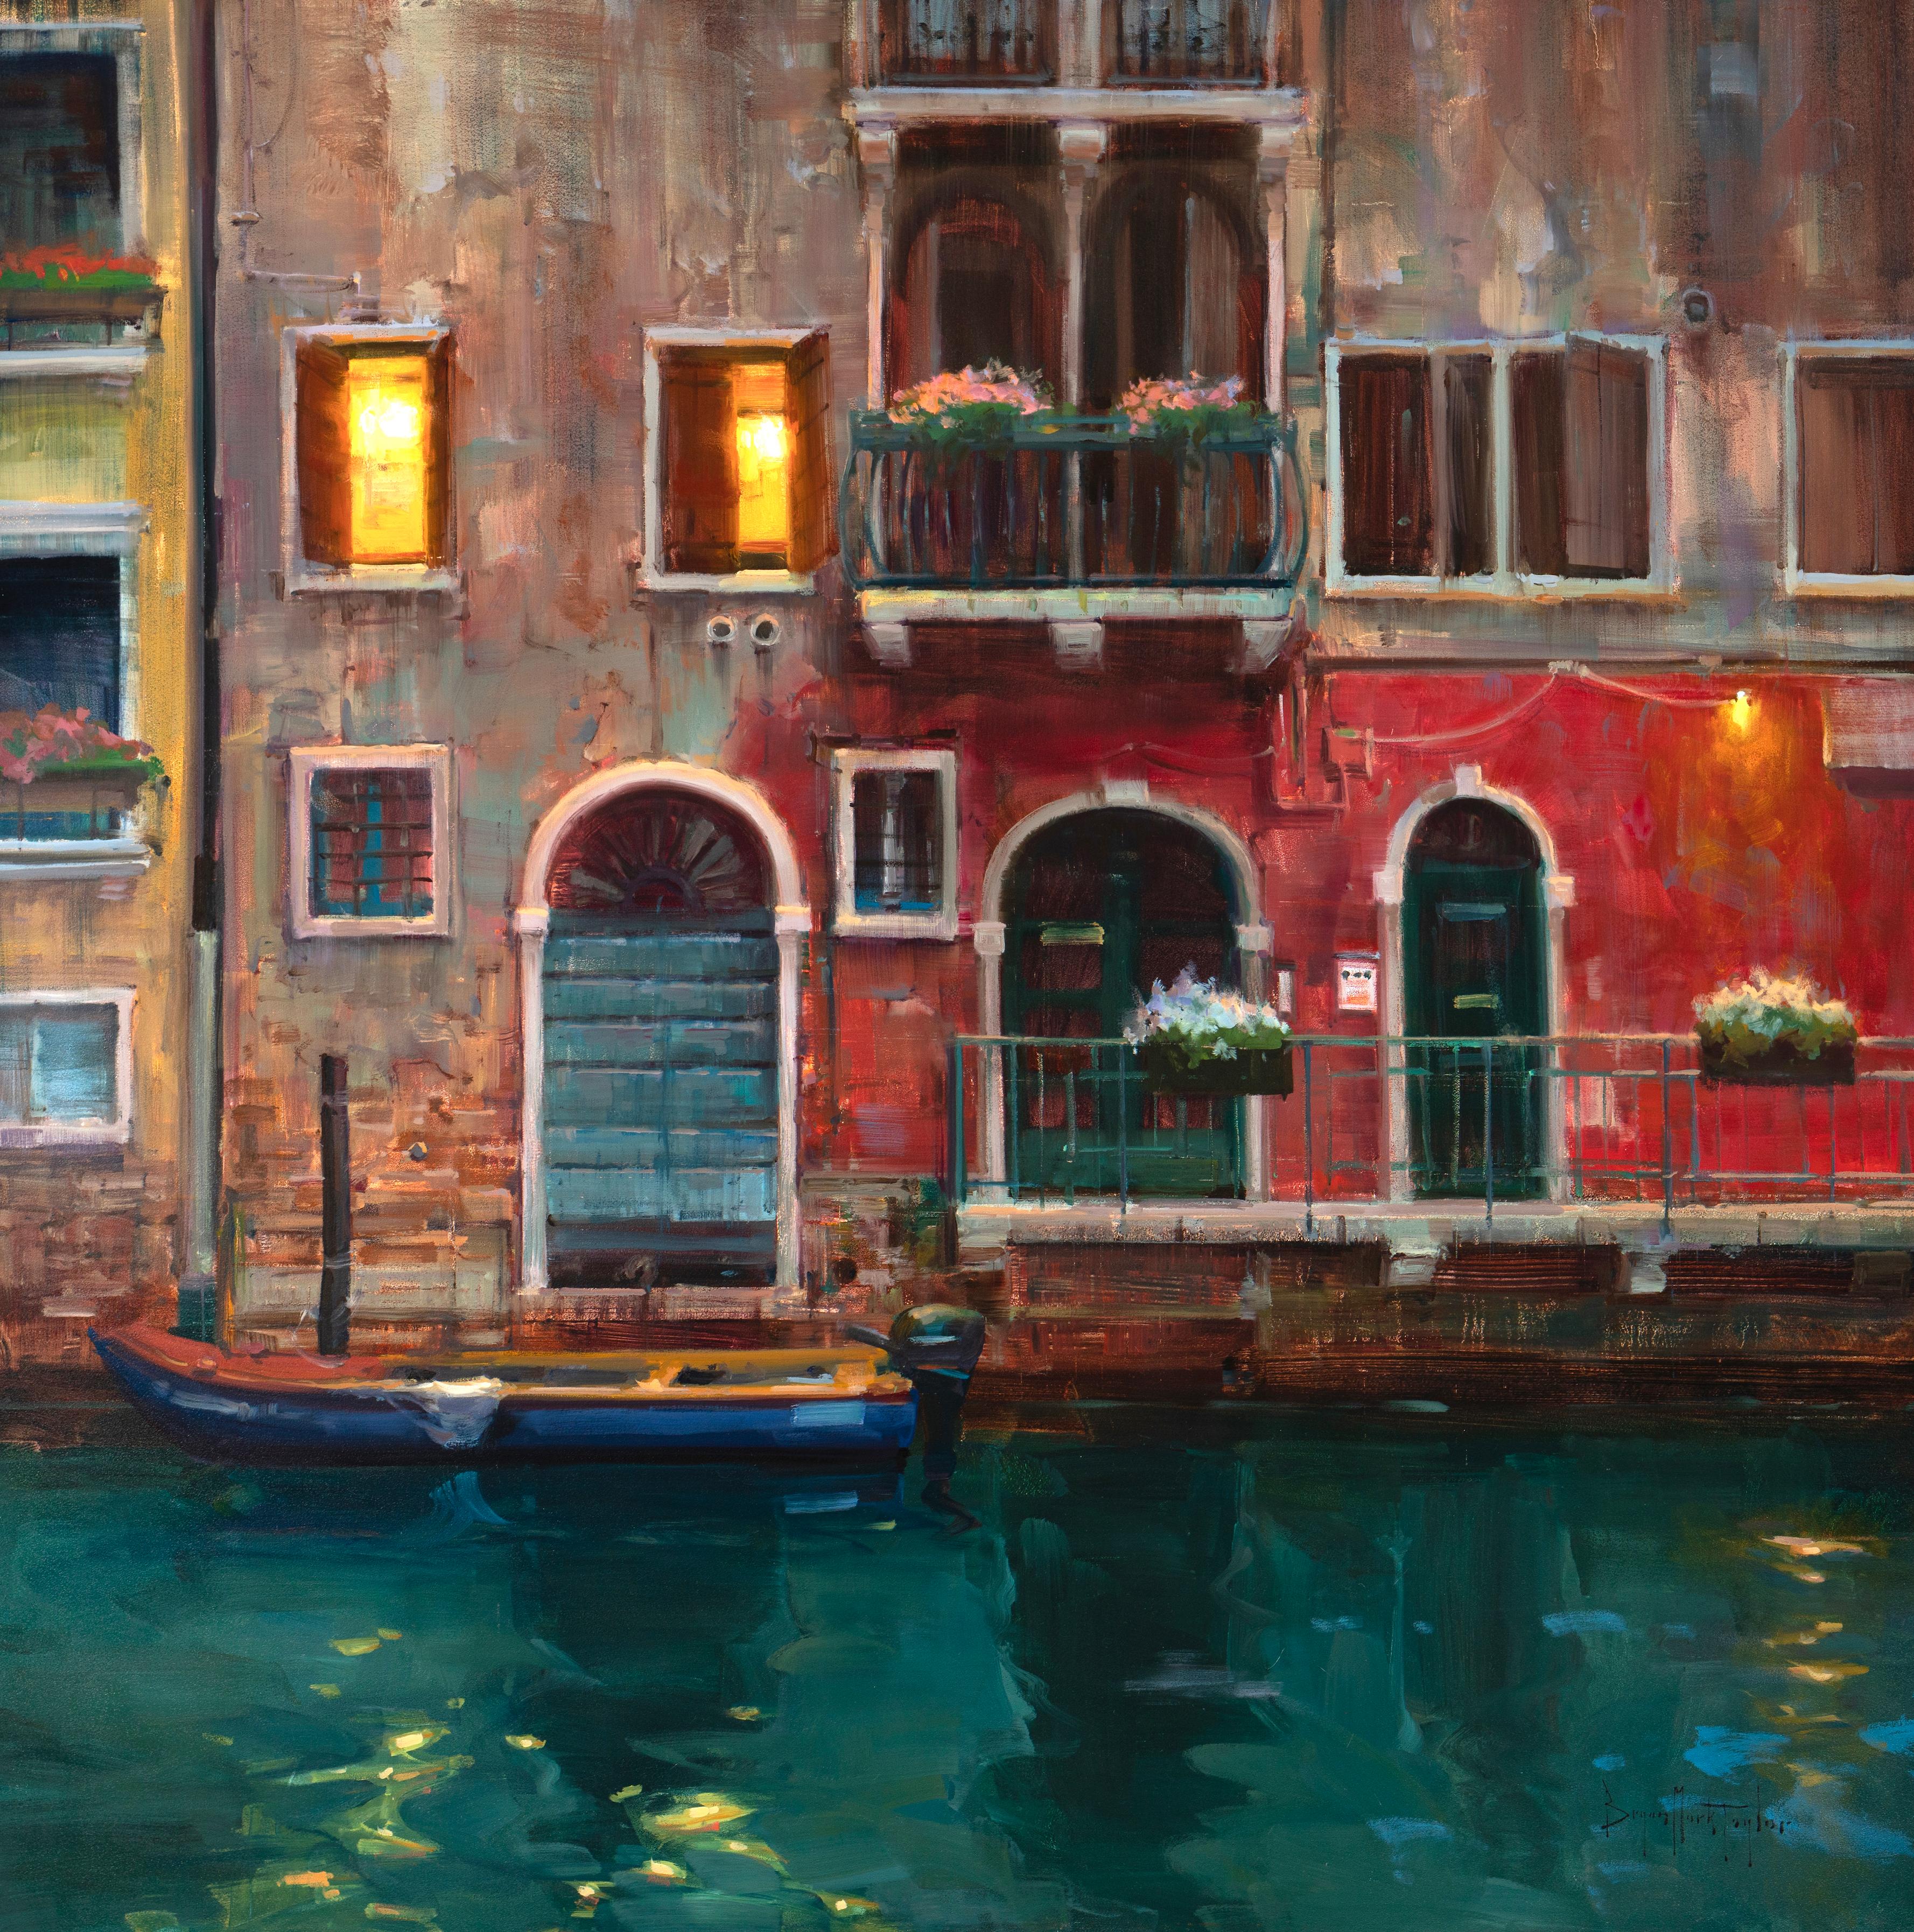 Bryan Mark Taylor Landscape Painting - "An Evening In Venice"  Classic Palace On A Canal In Venice